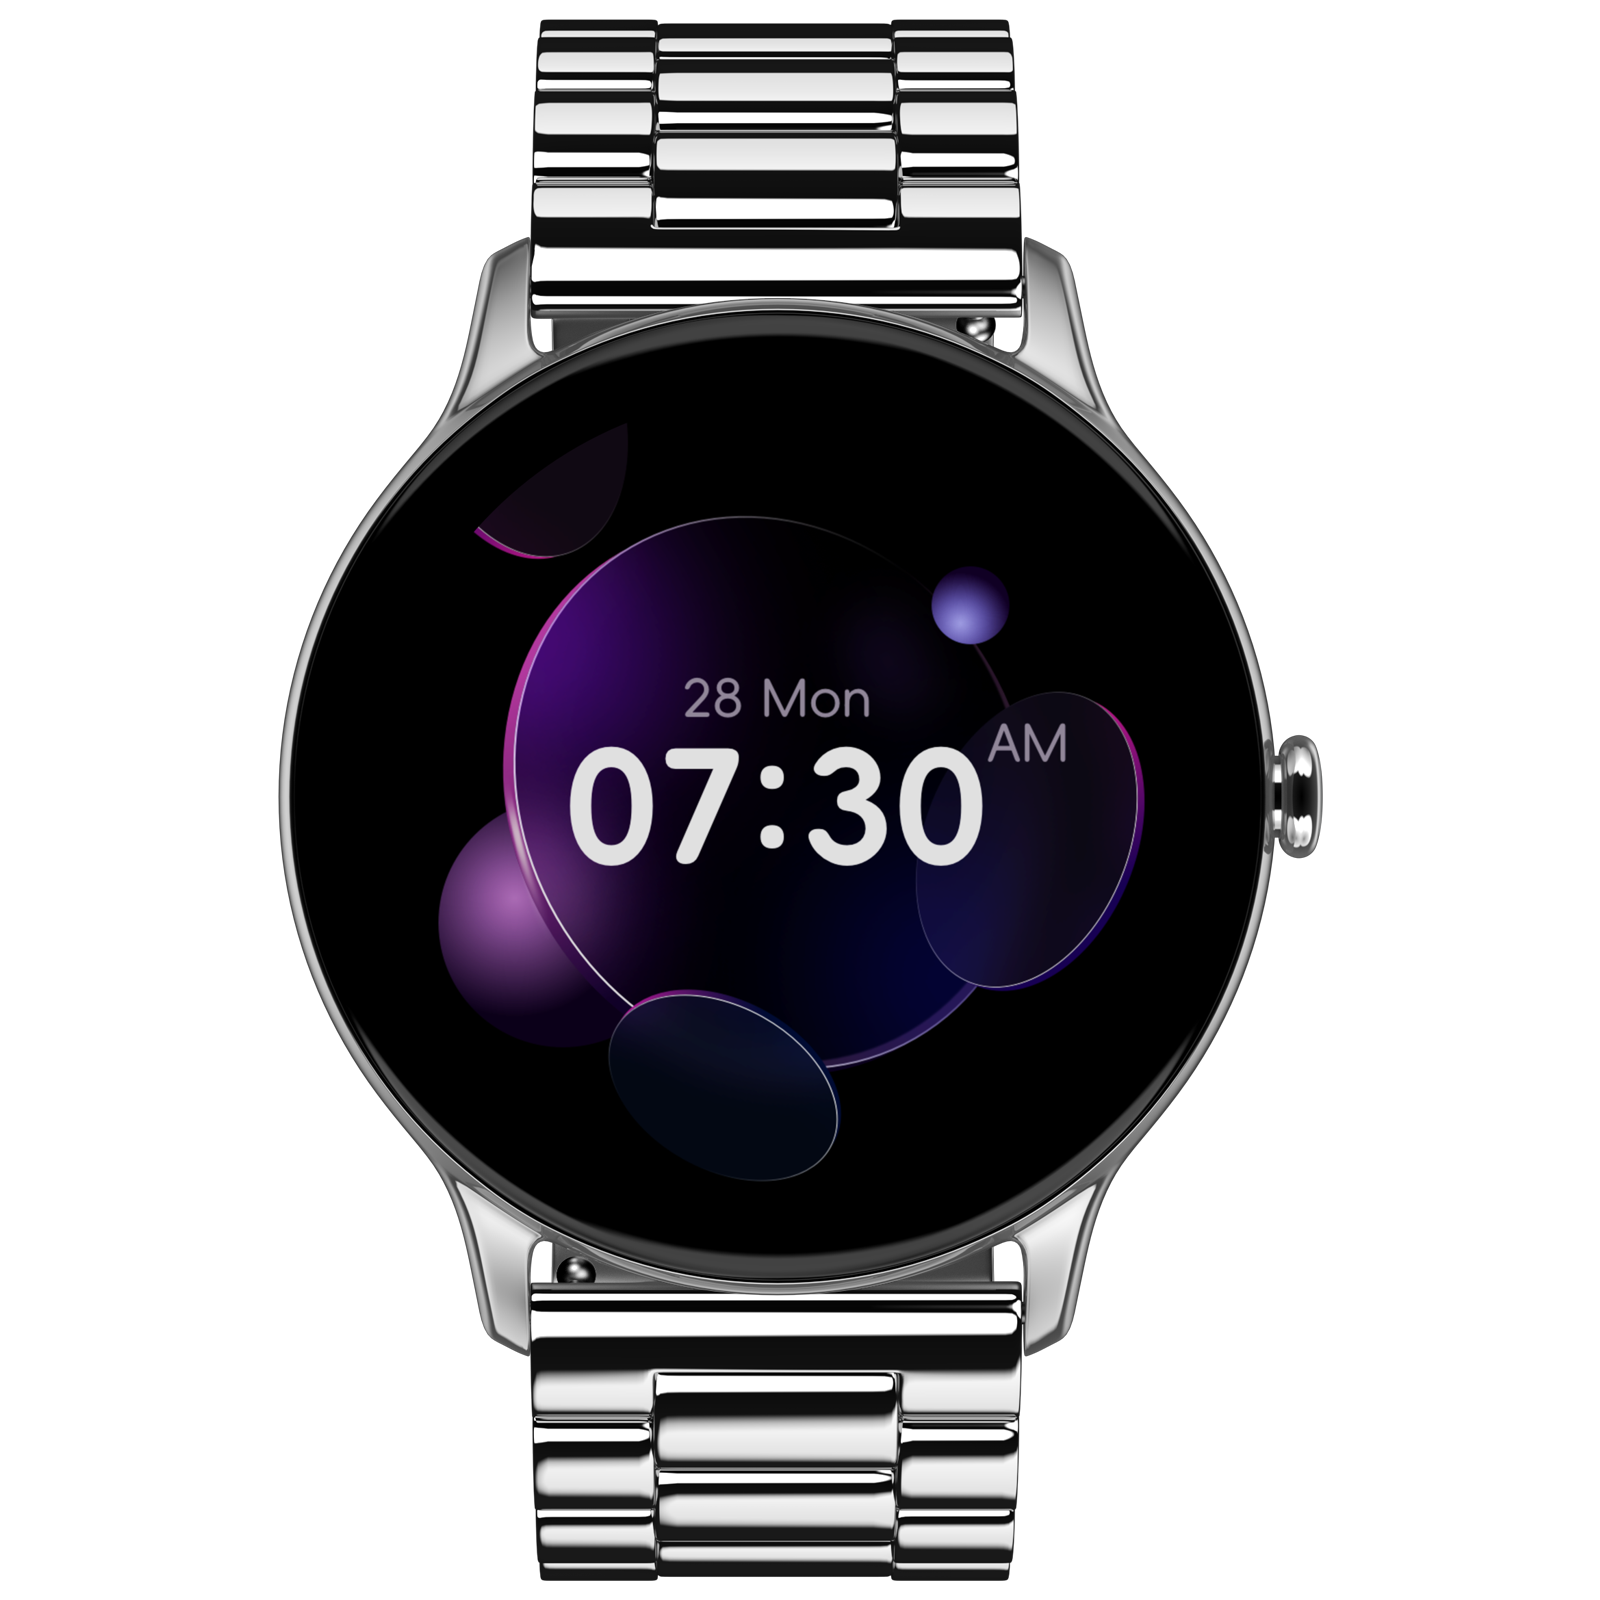 noise Twist Go Smartwatch with Bluetooth Calling (35mm TFT Display, IP67 Water Resistant, Elite Silver Strap)